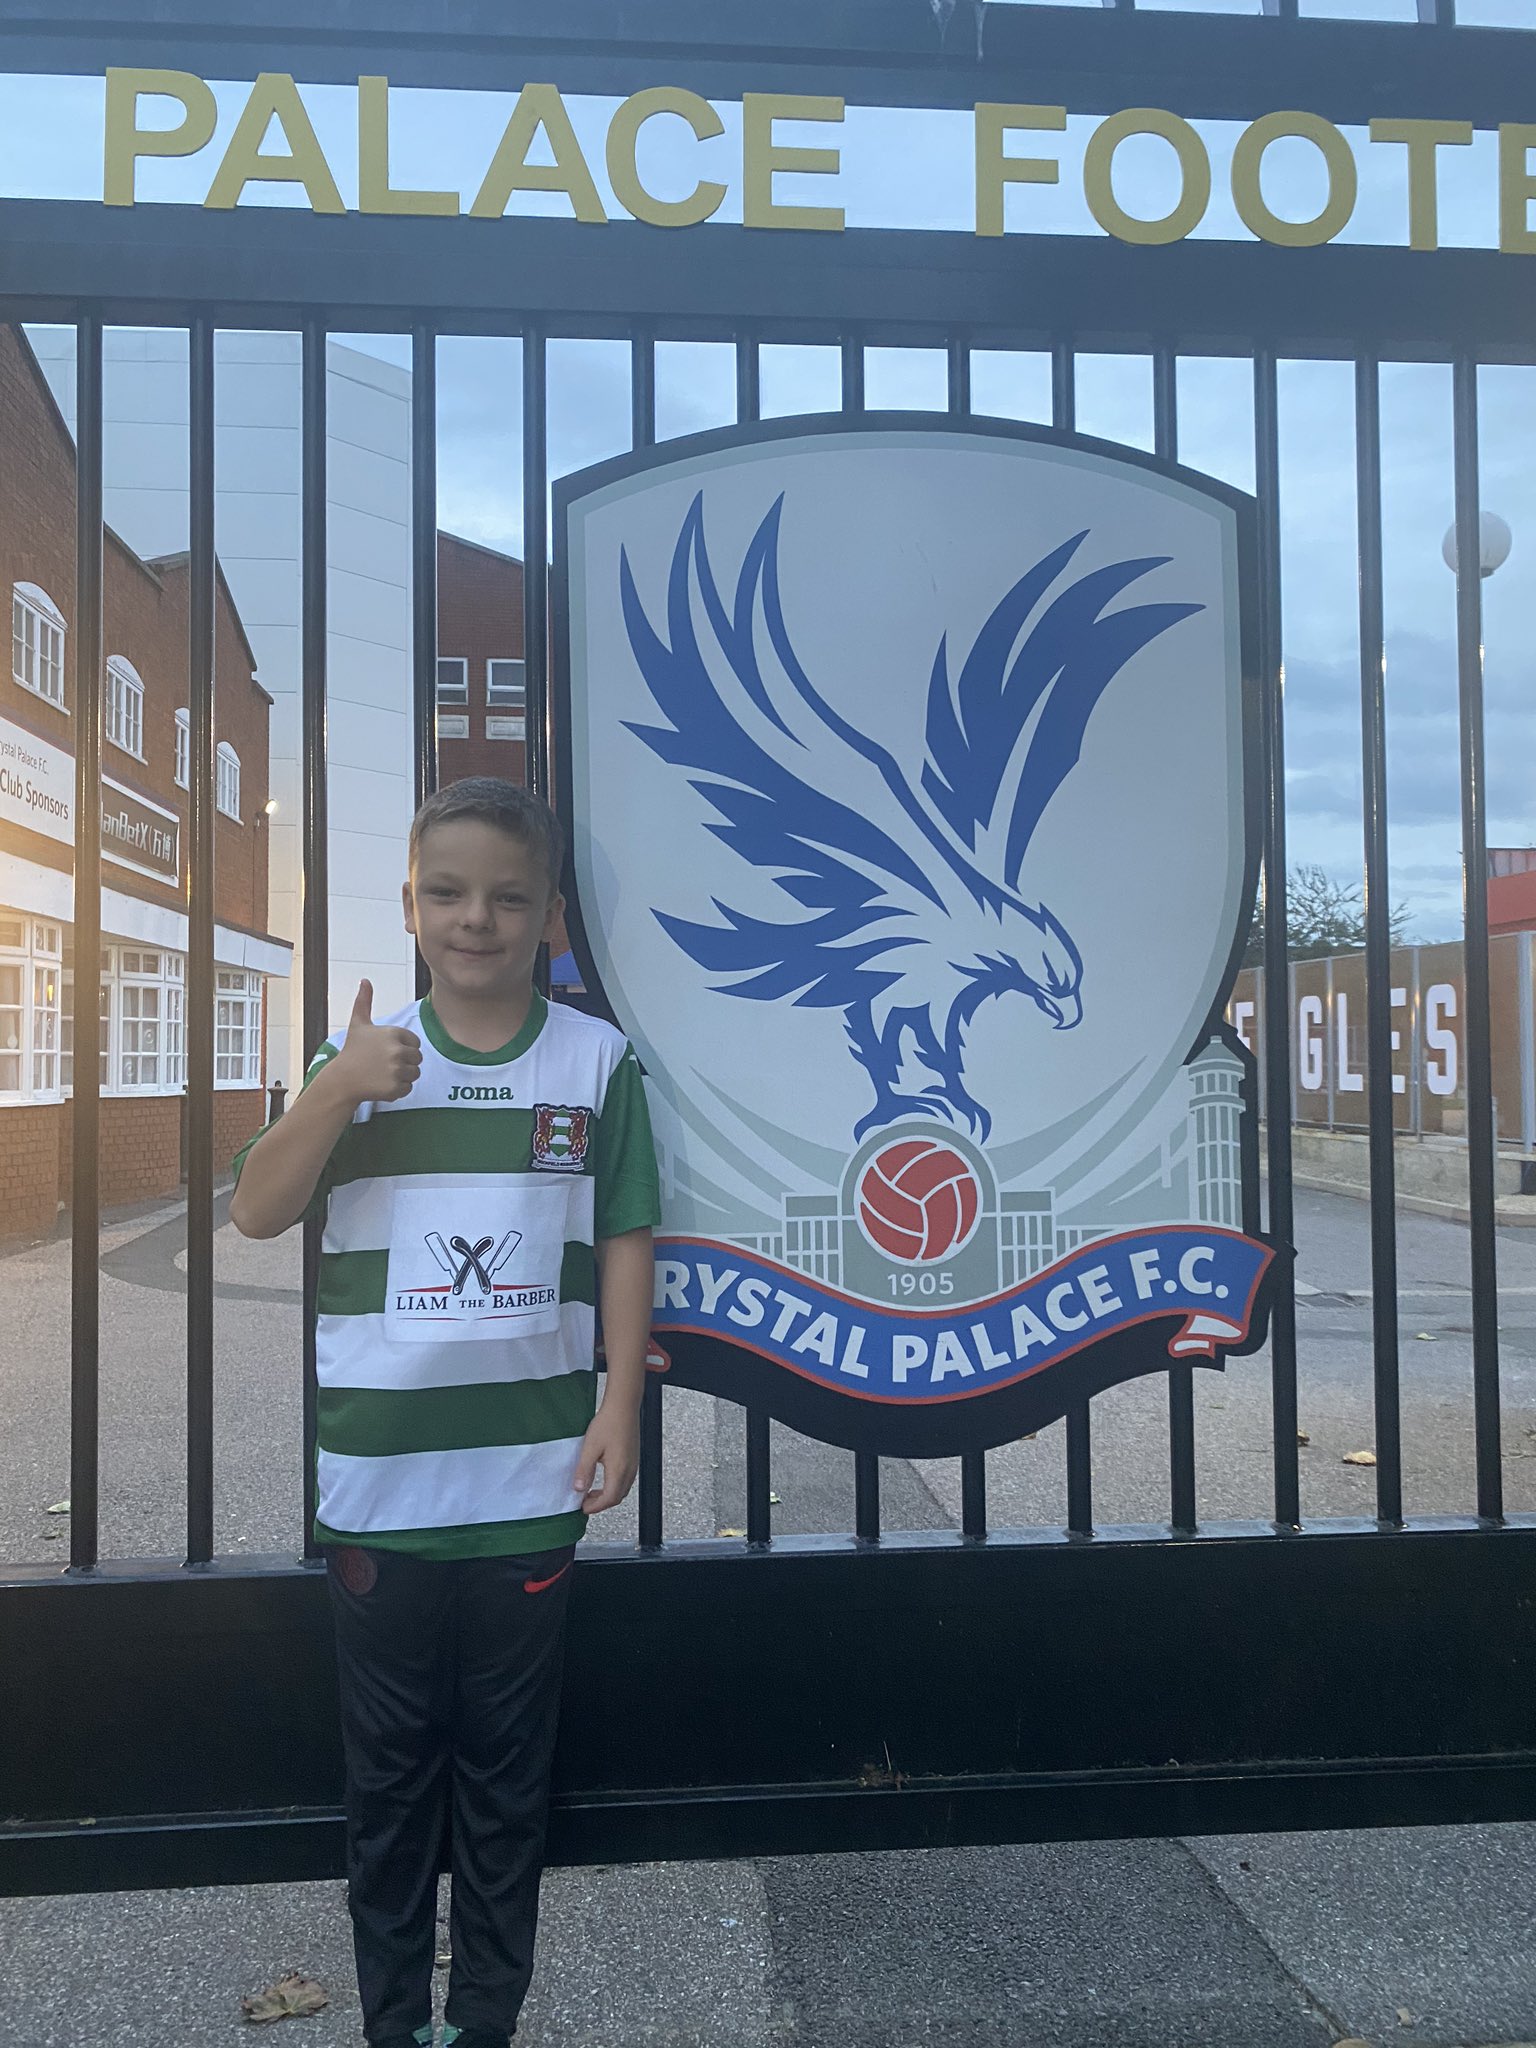 Paul lamb on X: Mario-Jack at his 6th ground.. @CPFC 6/20..  #SoccerAidChallenge 20 grounds in 24hrs in aid of #grassroots team  @BrickfieldRFC . Please retweet and please click the link in comments